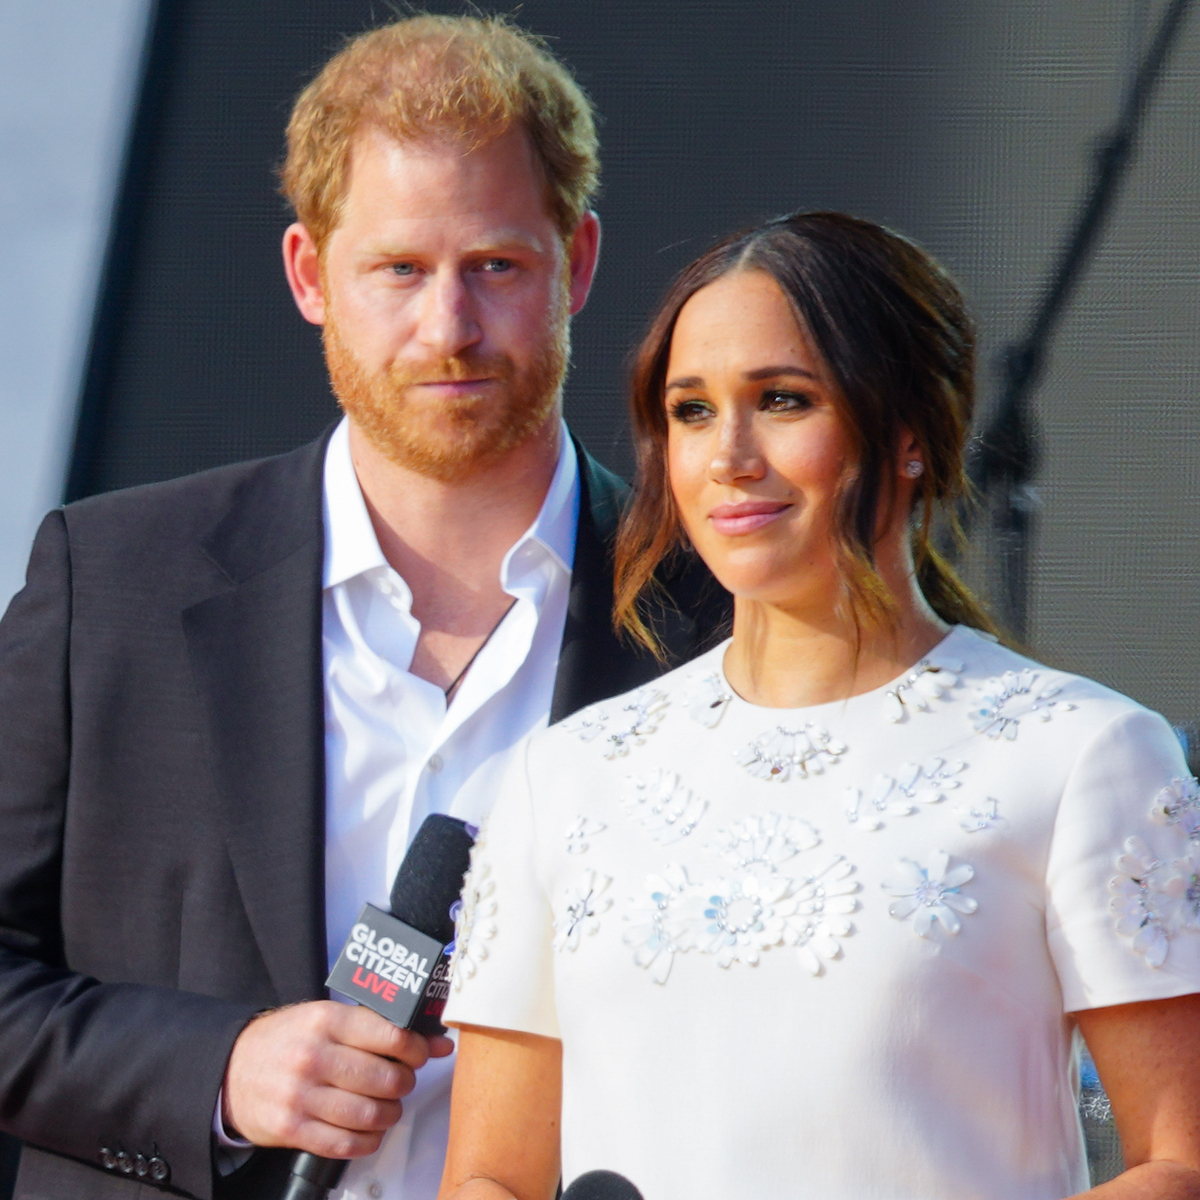 Meghan Markle & Prince Harry’s Archewell Charity Declared “Delinquent”